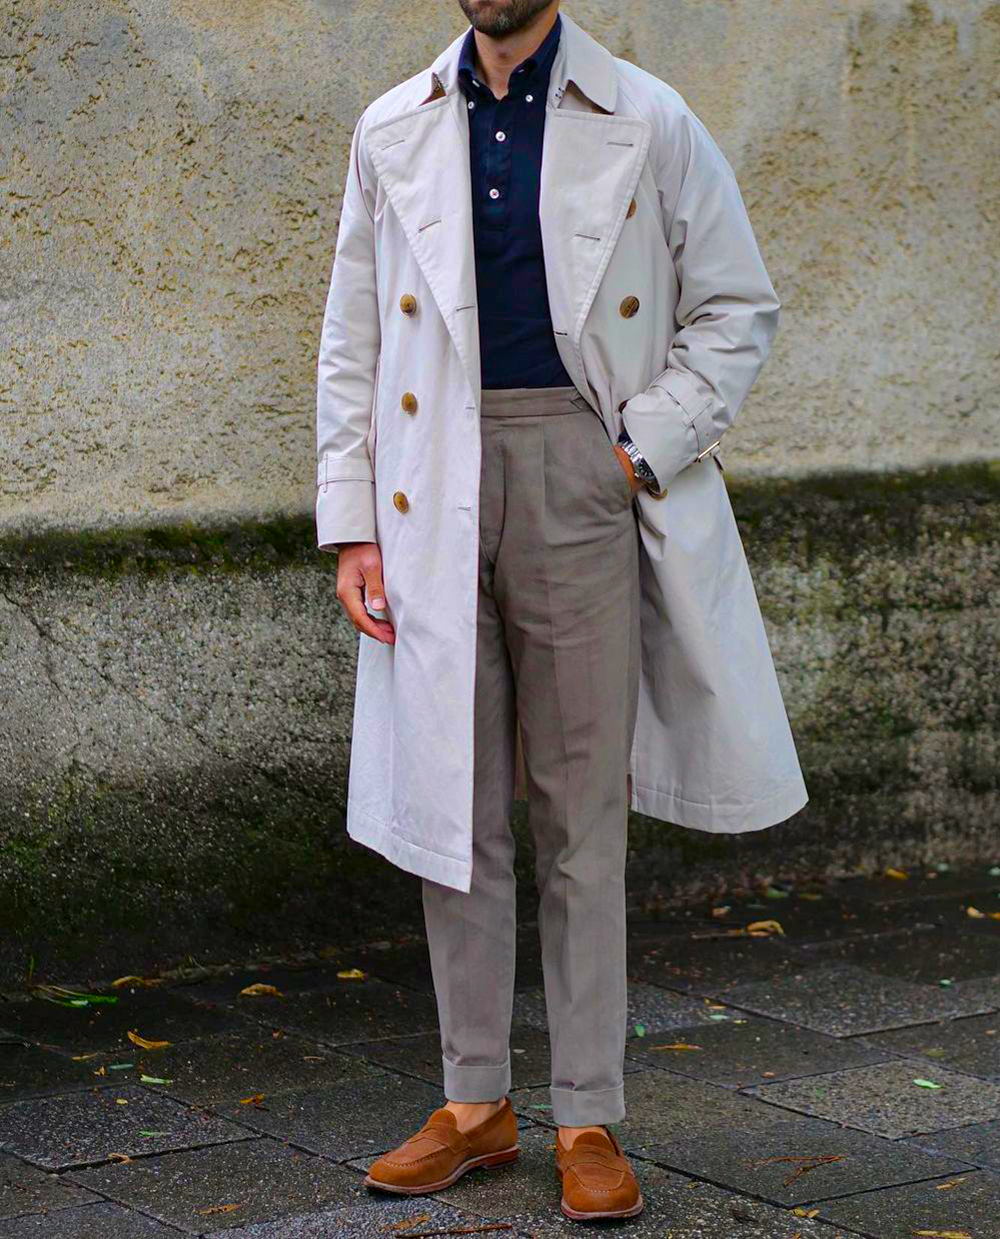 White trenchcoat, navy polo neck sweater, gray dress pants, brown suede loafers outfit